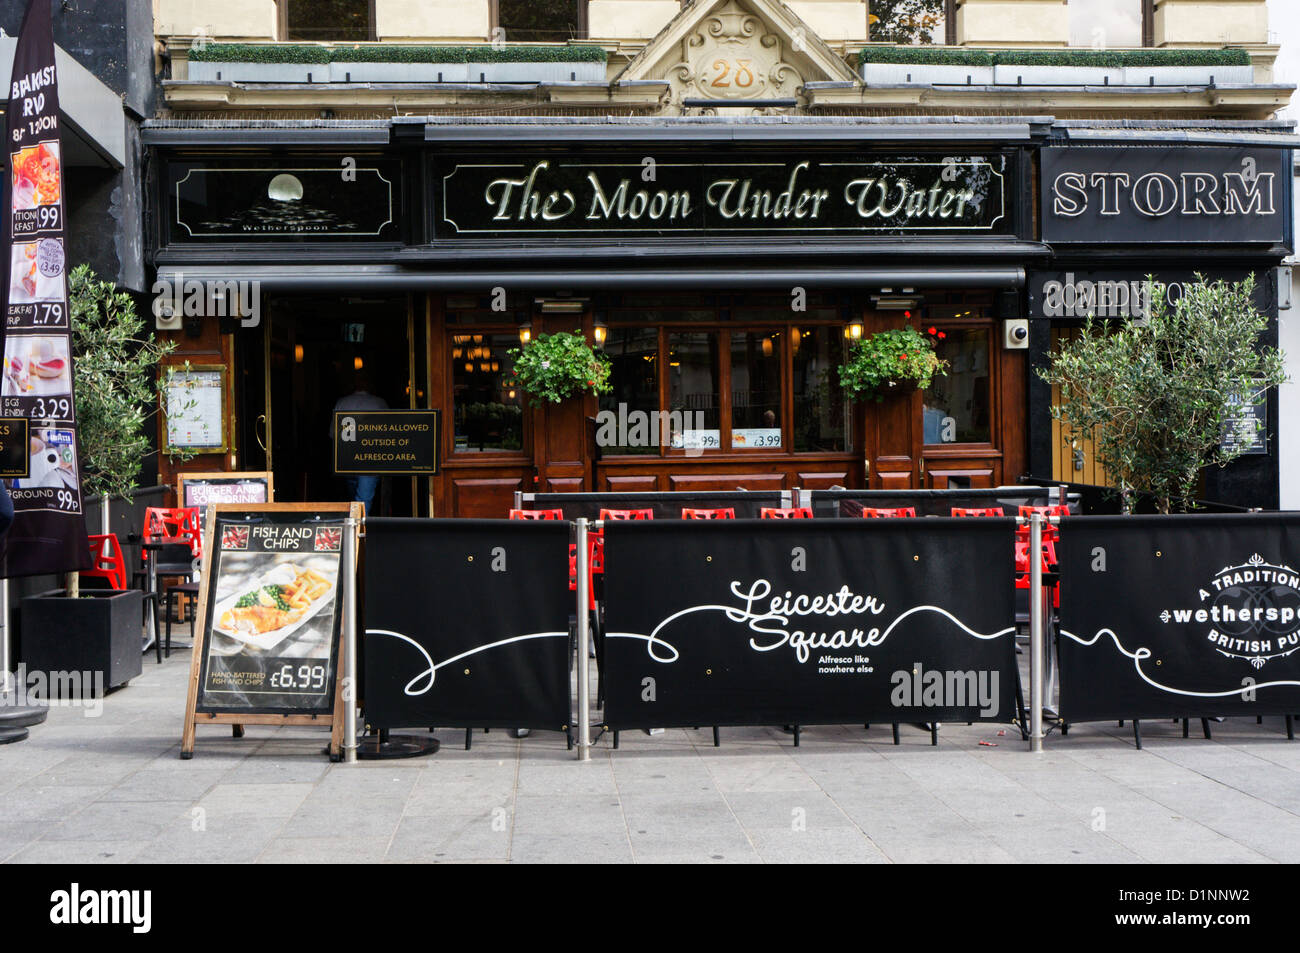 The Moon Under Water pub in Leicester Square, London Stock Photo - Alamy